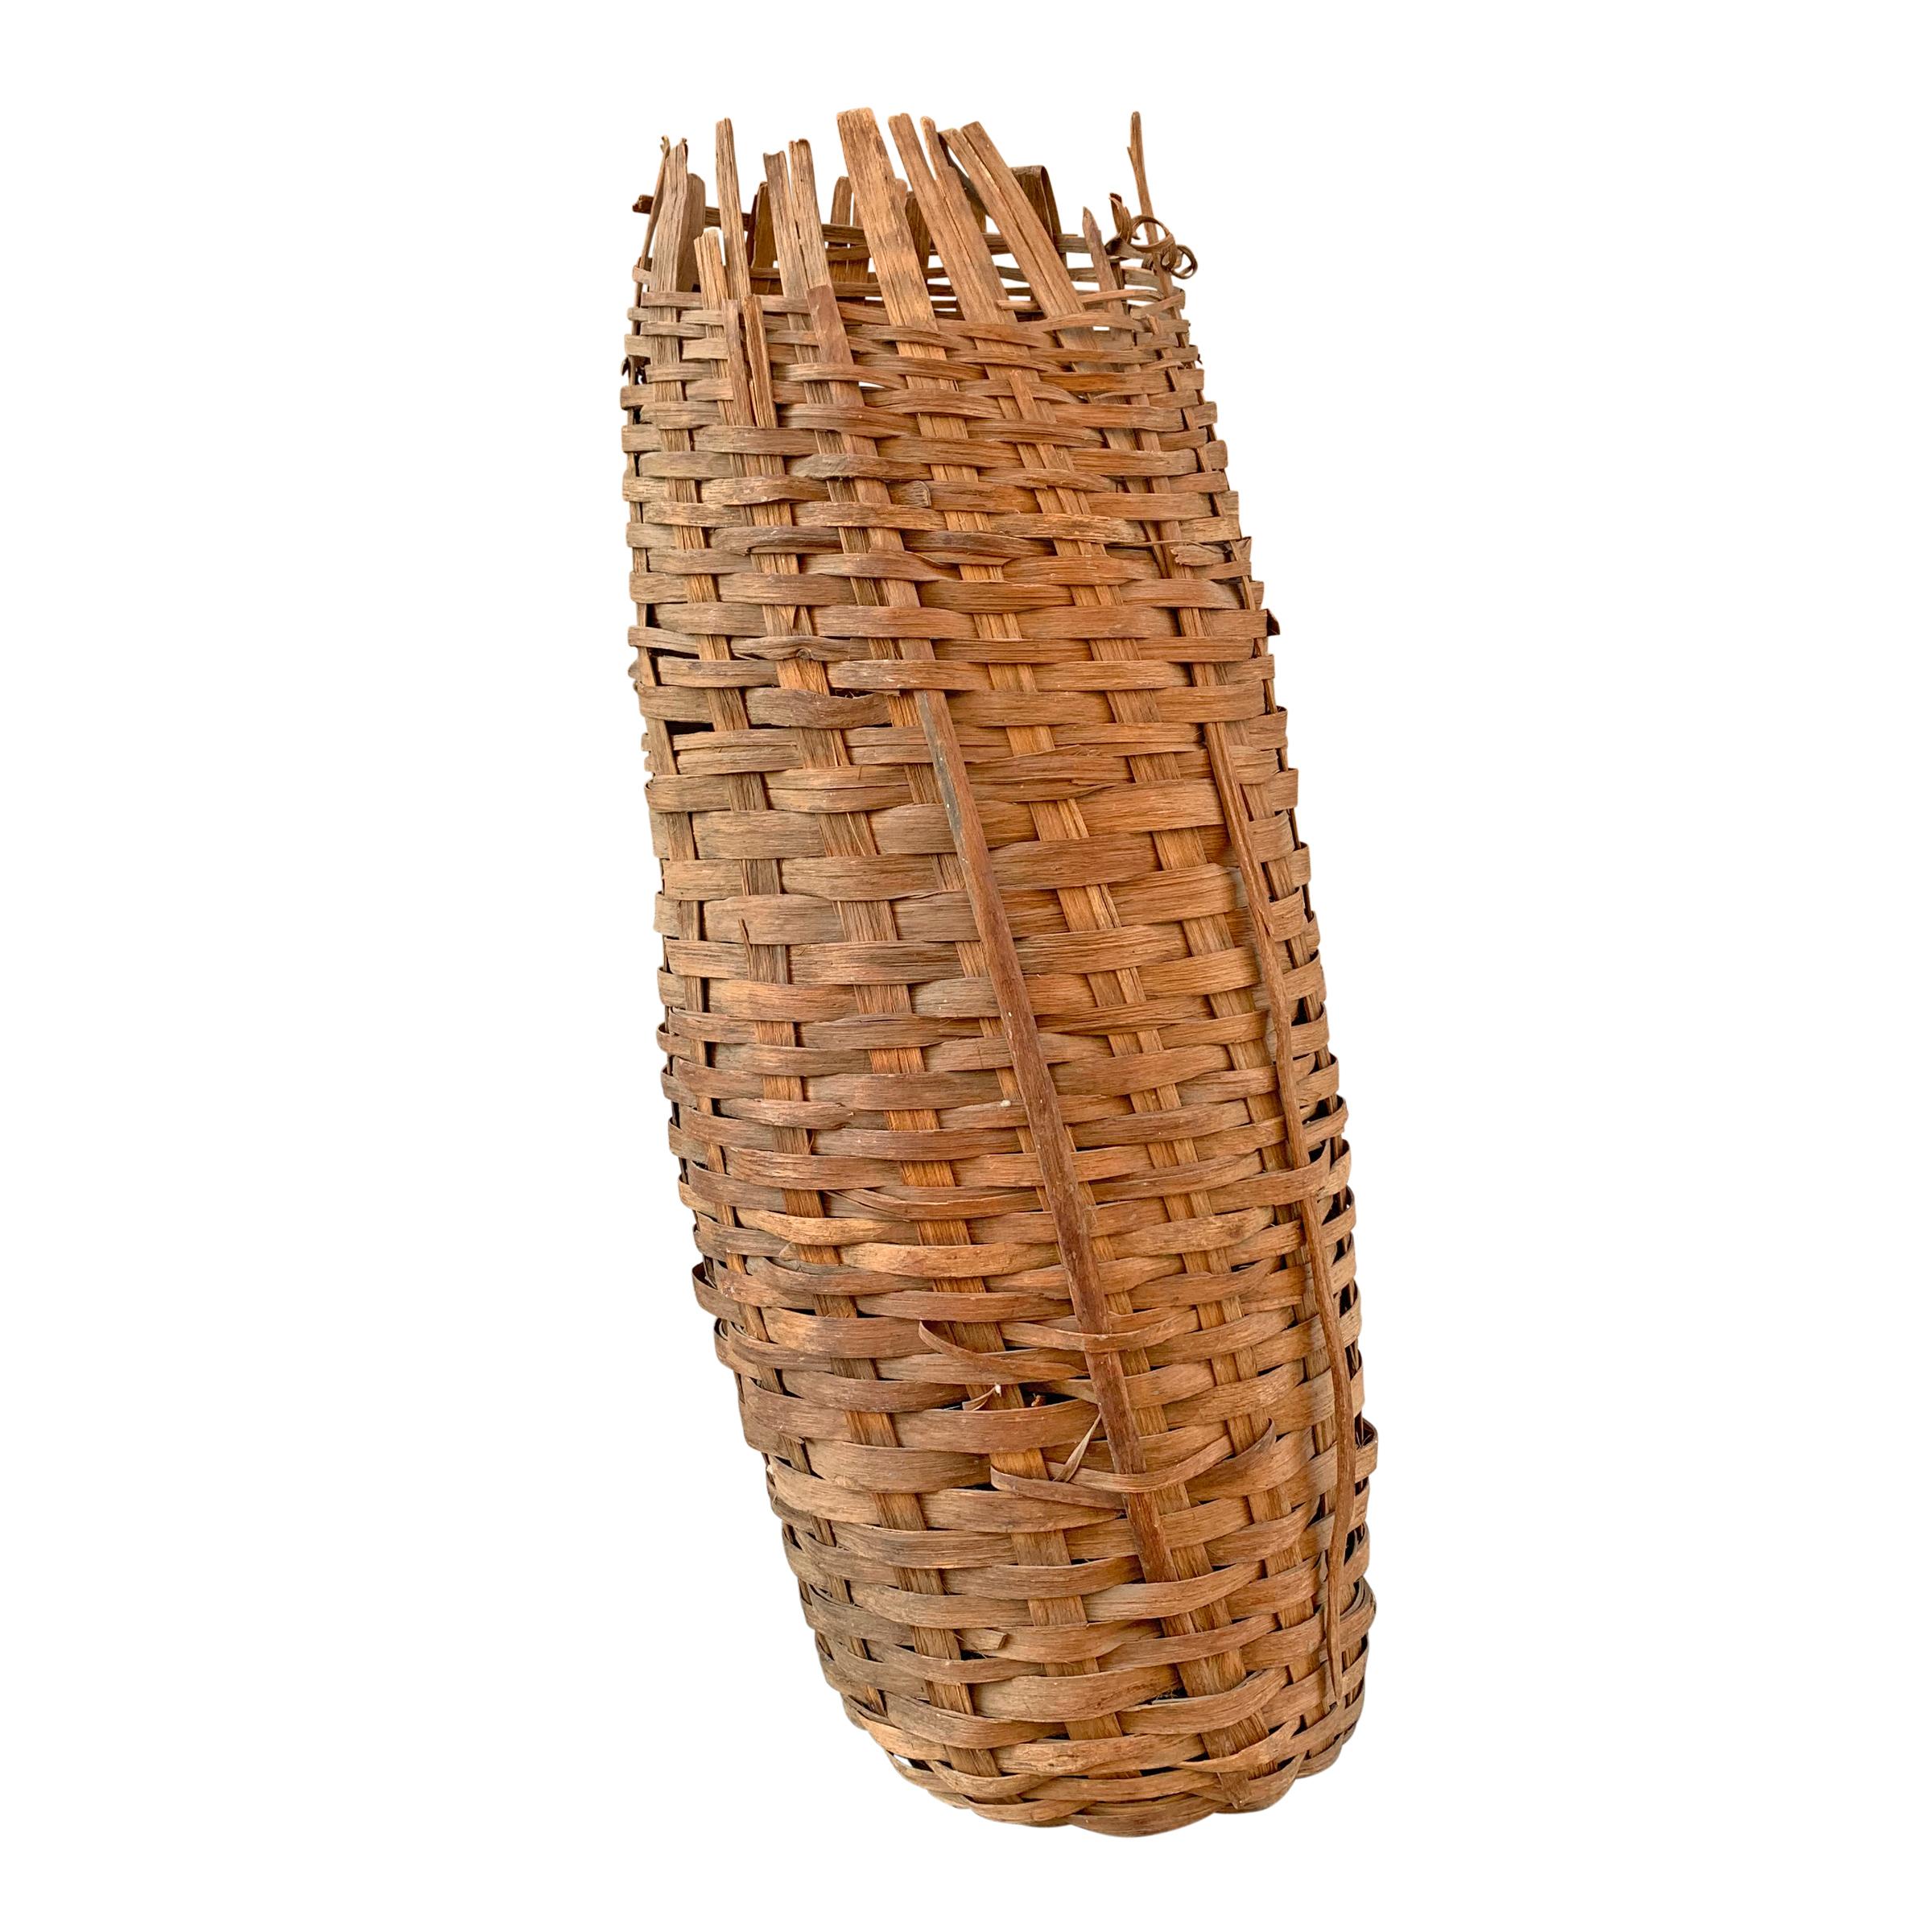 A fantastic sculptural 19th century American oak splint fishing basket of cylindrical form with one end turned in on itself. Basket stands up vertically, but would also be interesting hung horizontally on a wall.